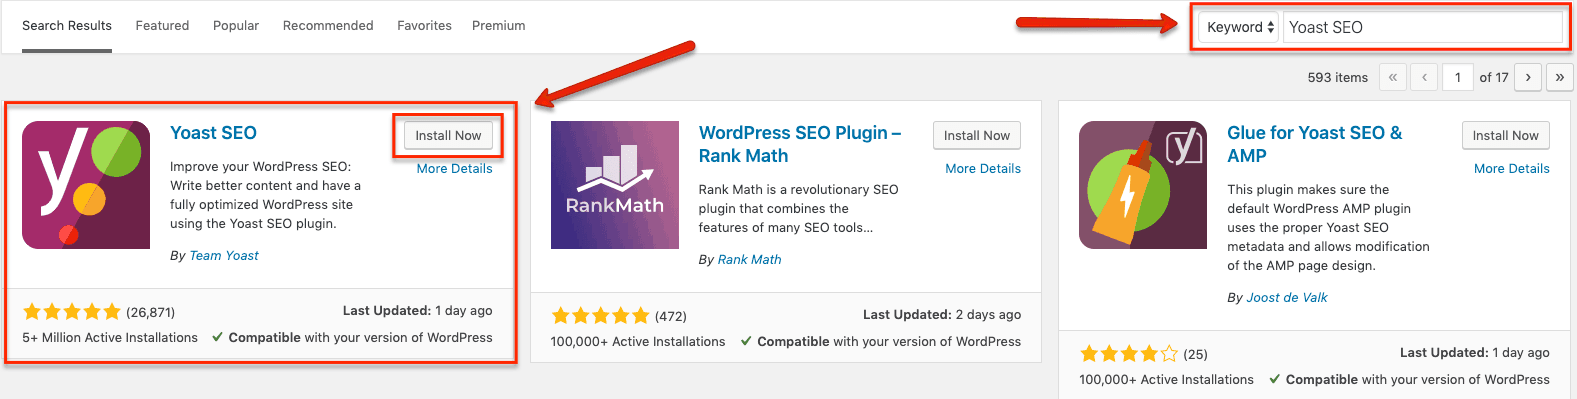 How to add the find and add the Yoast SEO plugin to your blog.